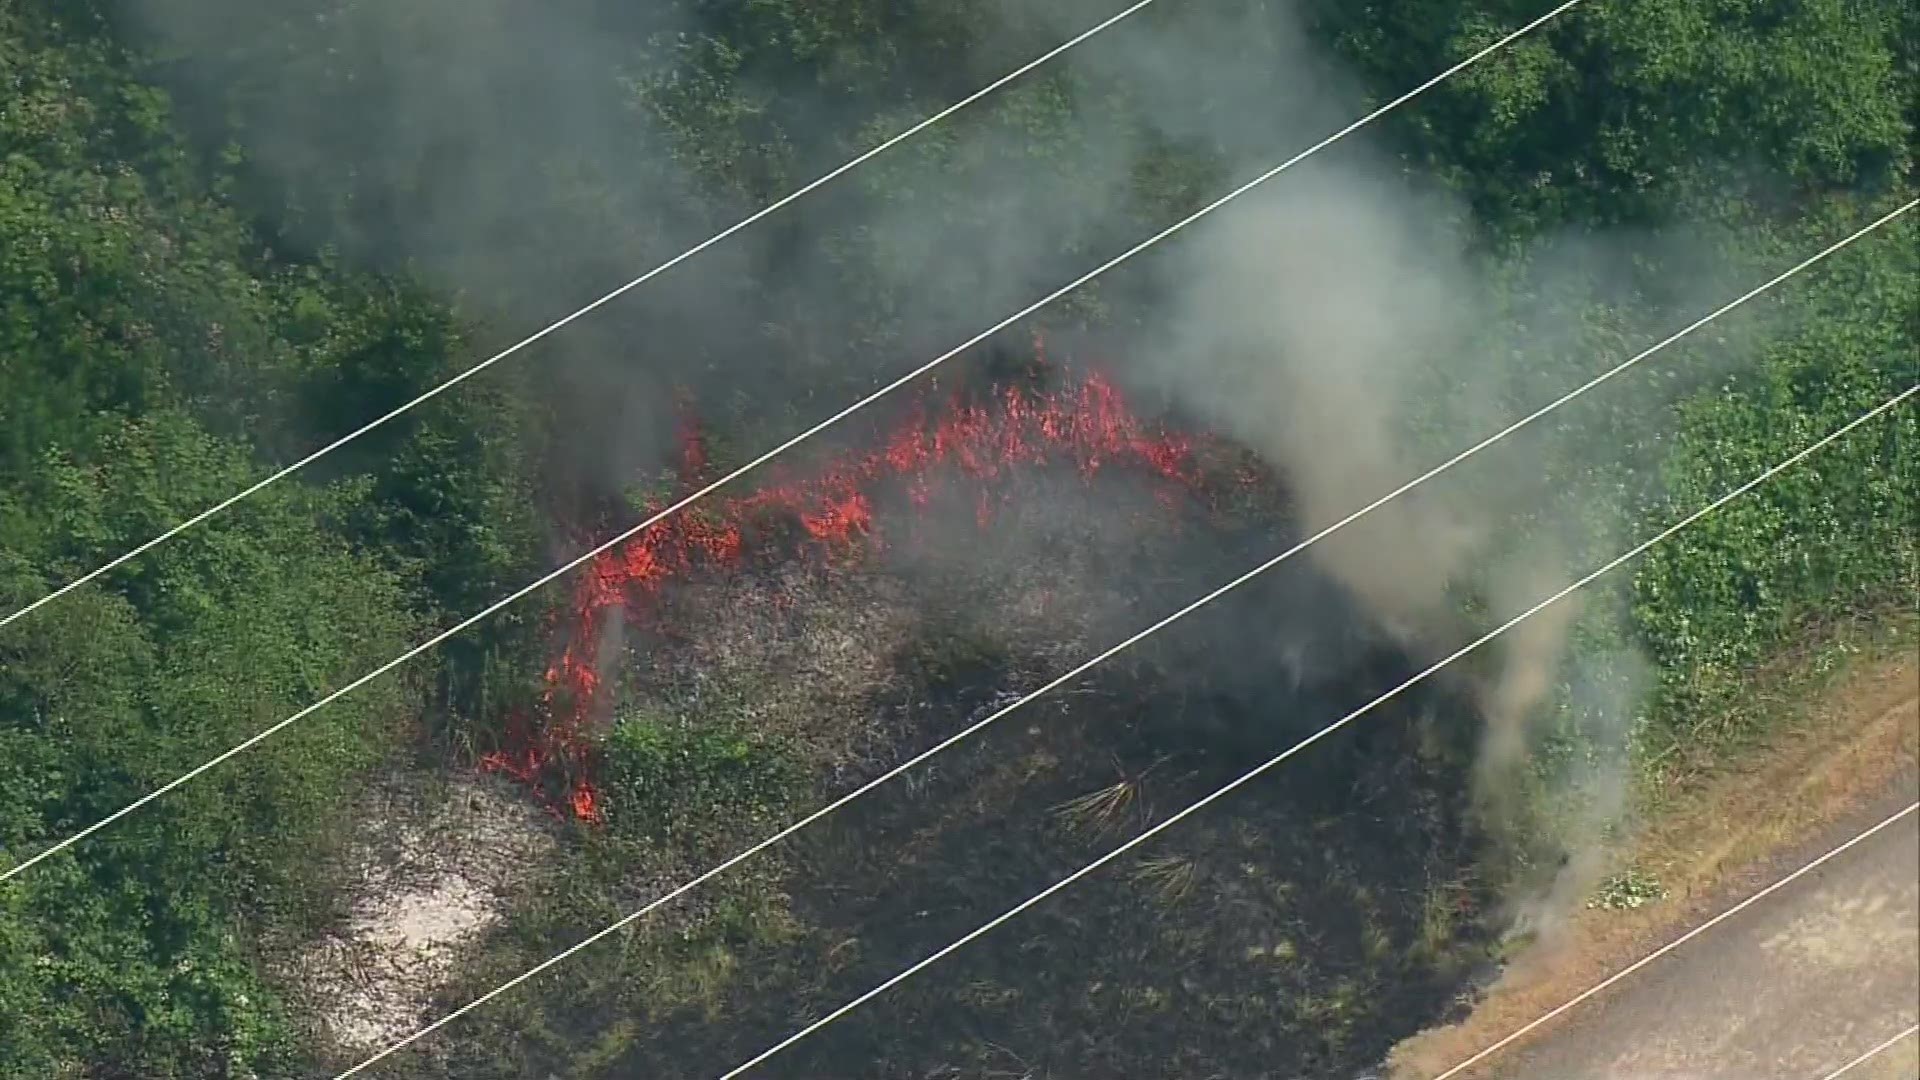 A transformer explosion caused a brush fire near homes and under power lines in Redmond on Monday afternoon. Aerials from SkyKING show how close the flames came to a neighborhood and network of power lines.